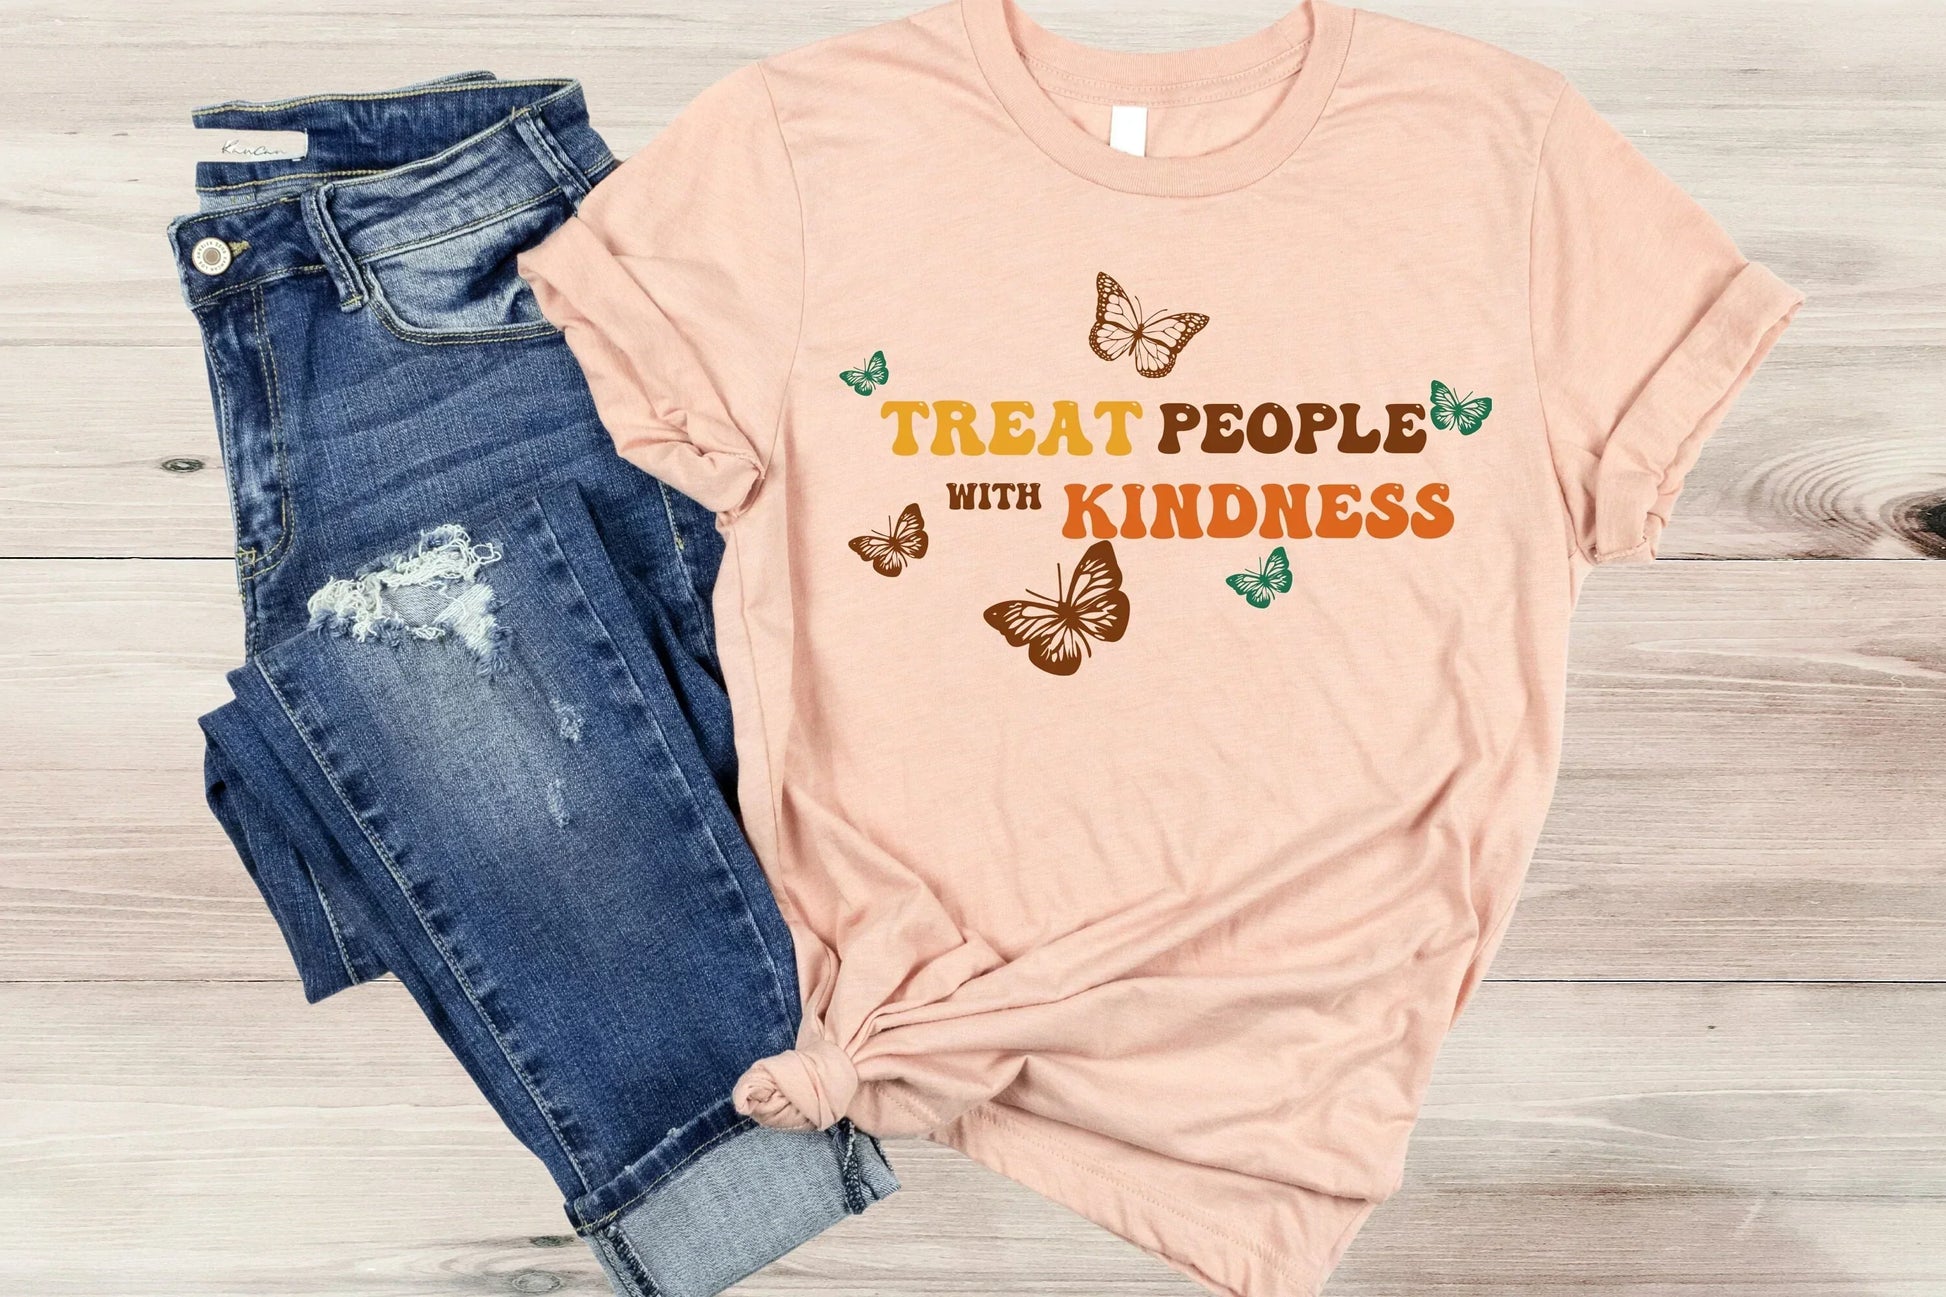 Treat People With Kindness, Retro Harry, Harry Styles Shirt, Fine Line Shirt, Kindness Sweatshirt for Women, One Direction Hoodie, Empathy